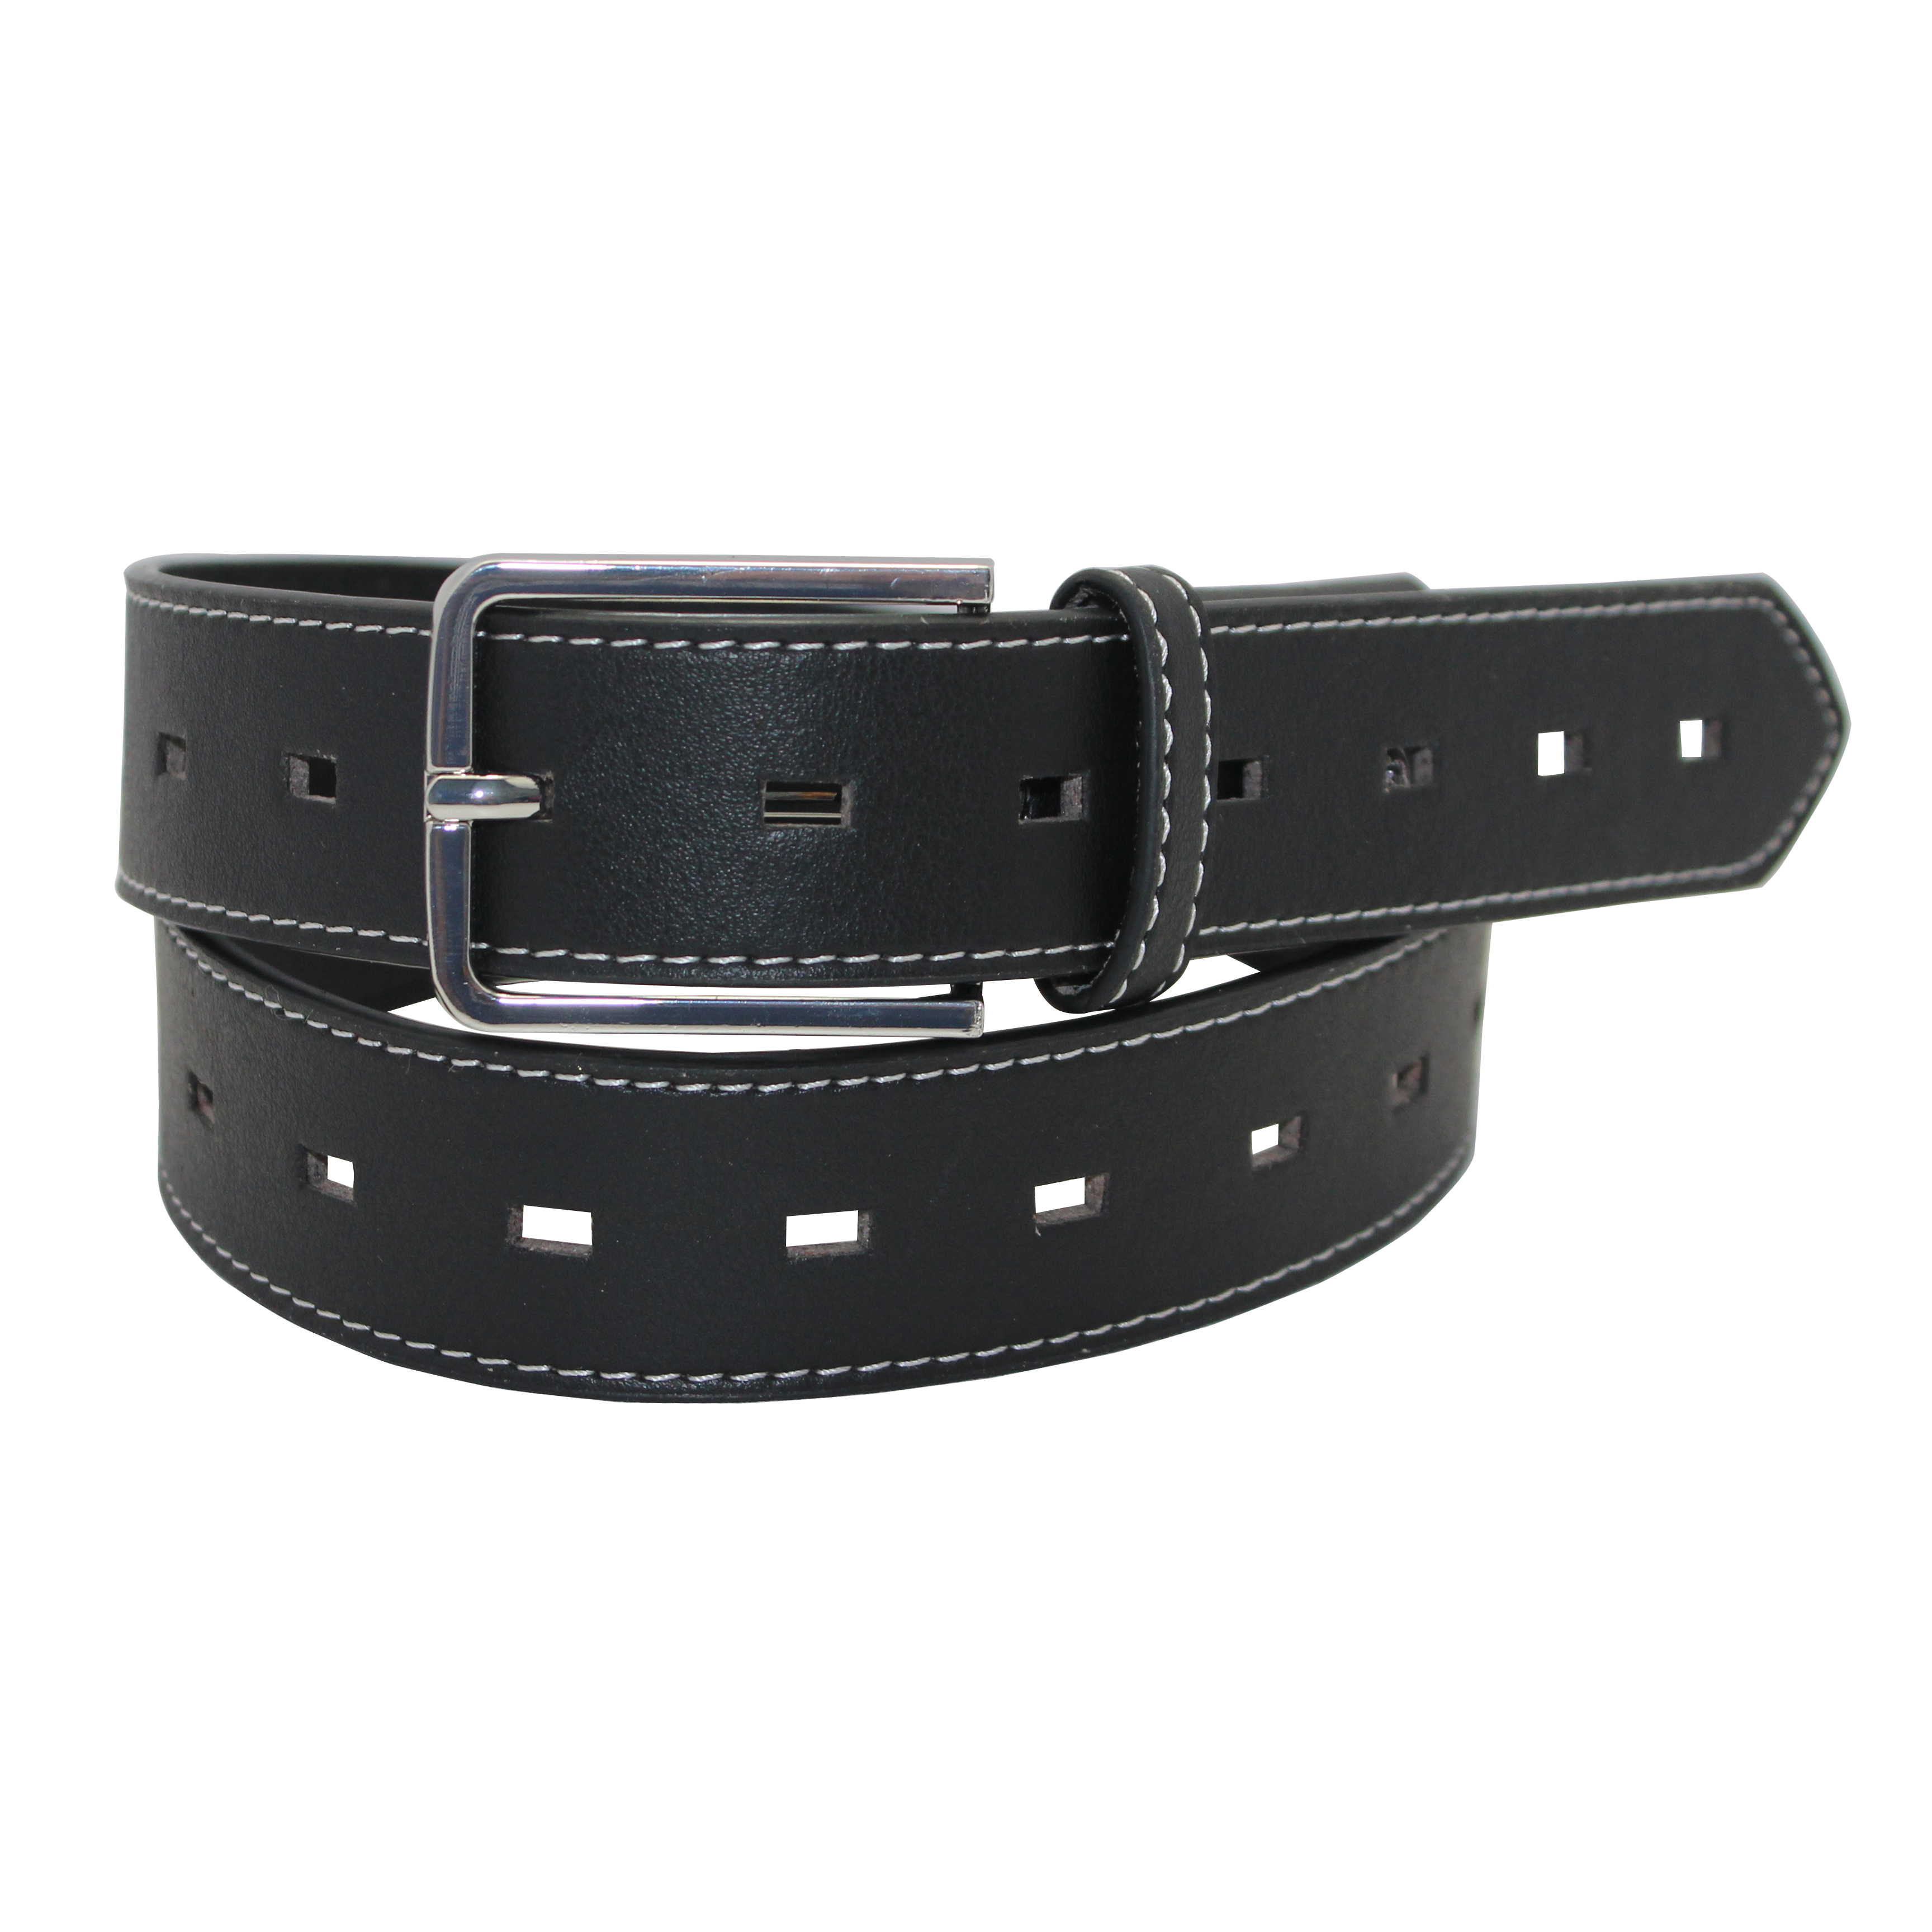 Rustic <a href='/brown-leather-belt/'>Brown Leather Belt</a> for Jeans 35-23639